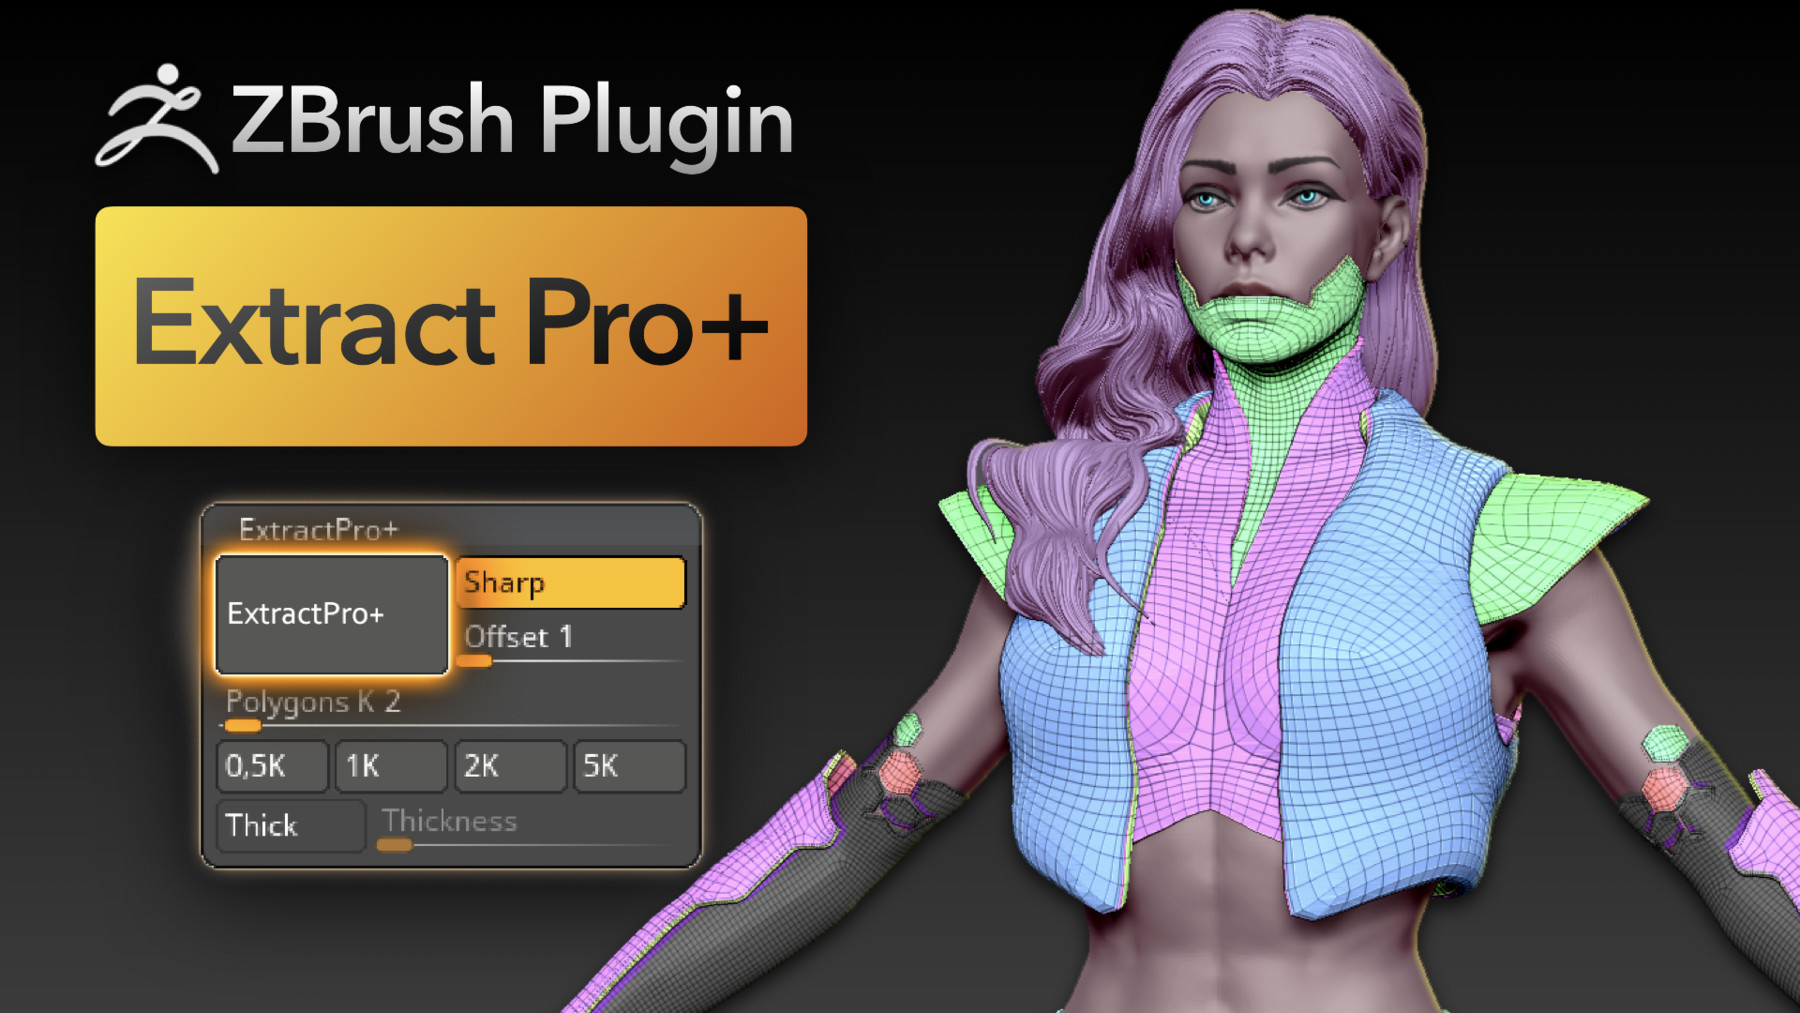 can you buy older versions of zbrush